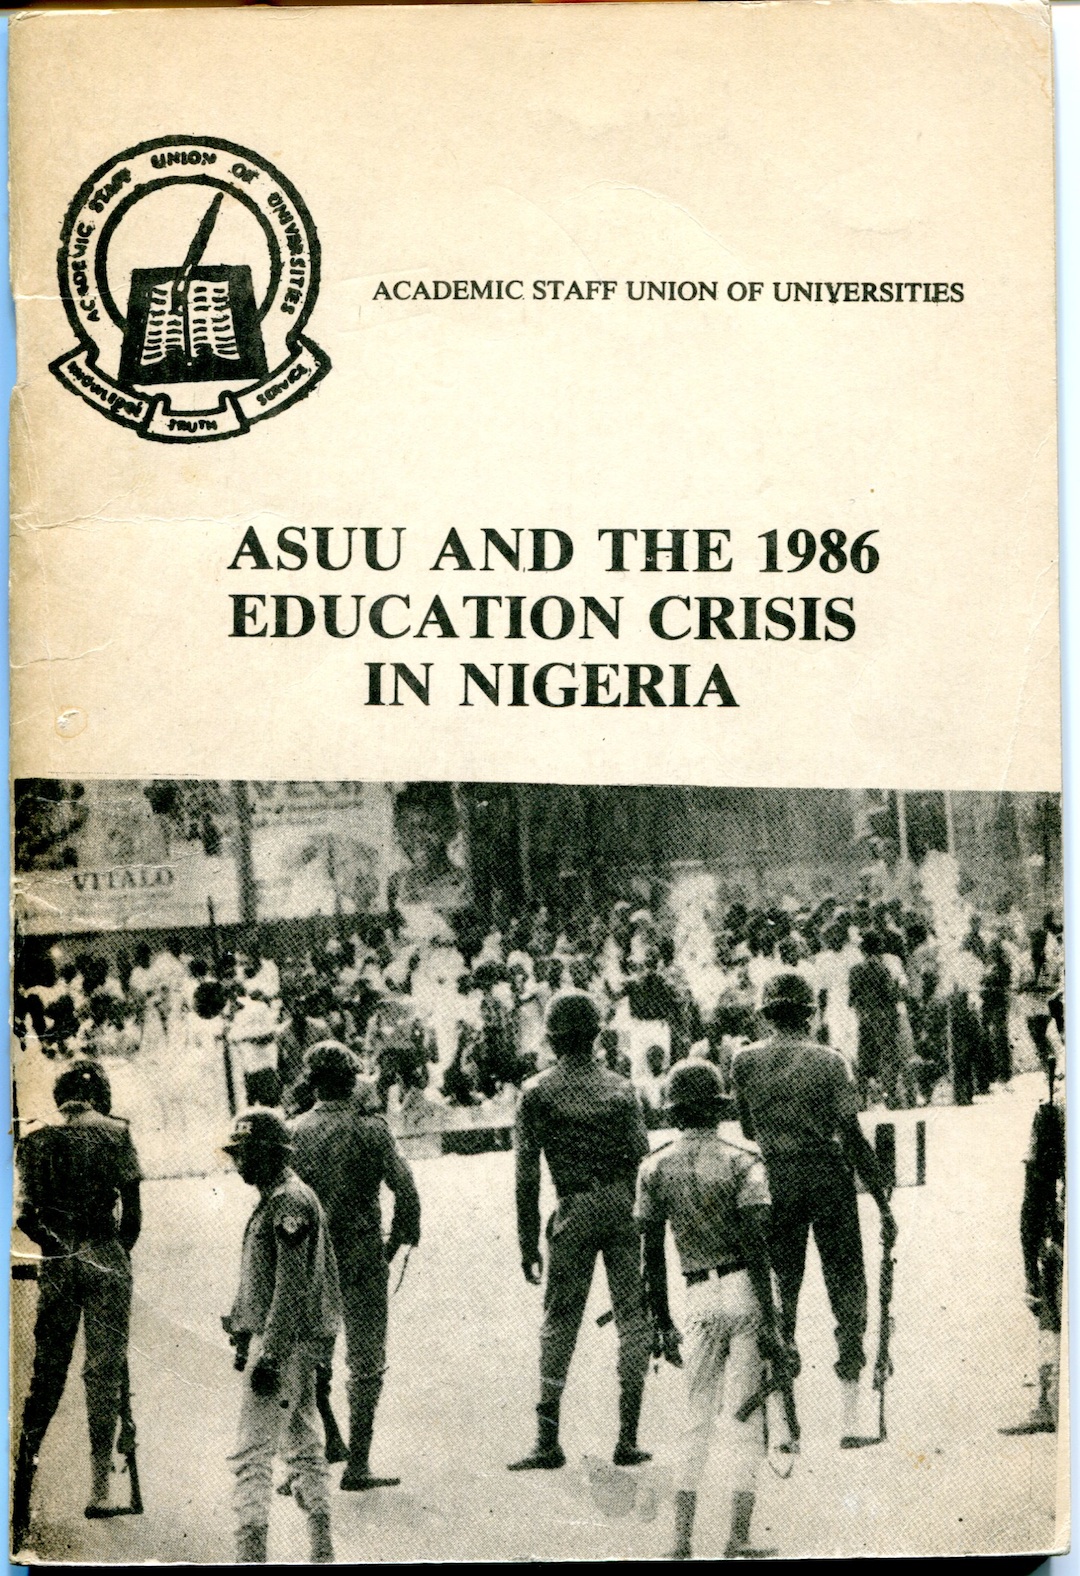 Committee for Academic Freedom in Africa. Booklet. ASUU and The 1986 Education Crisis in Nigeria. Cover. Deposited with MayDay Rooms by George Caffentzis and Silvia Federici, 29 January, 2013.